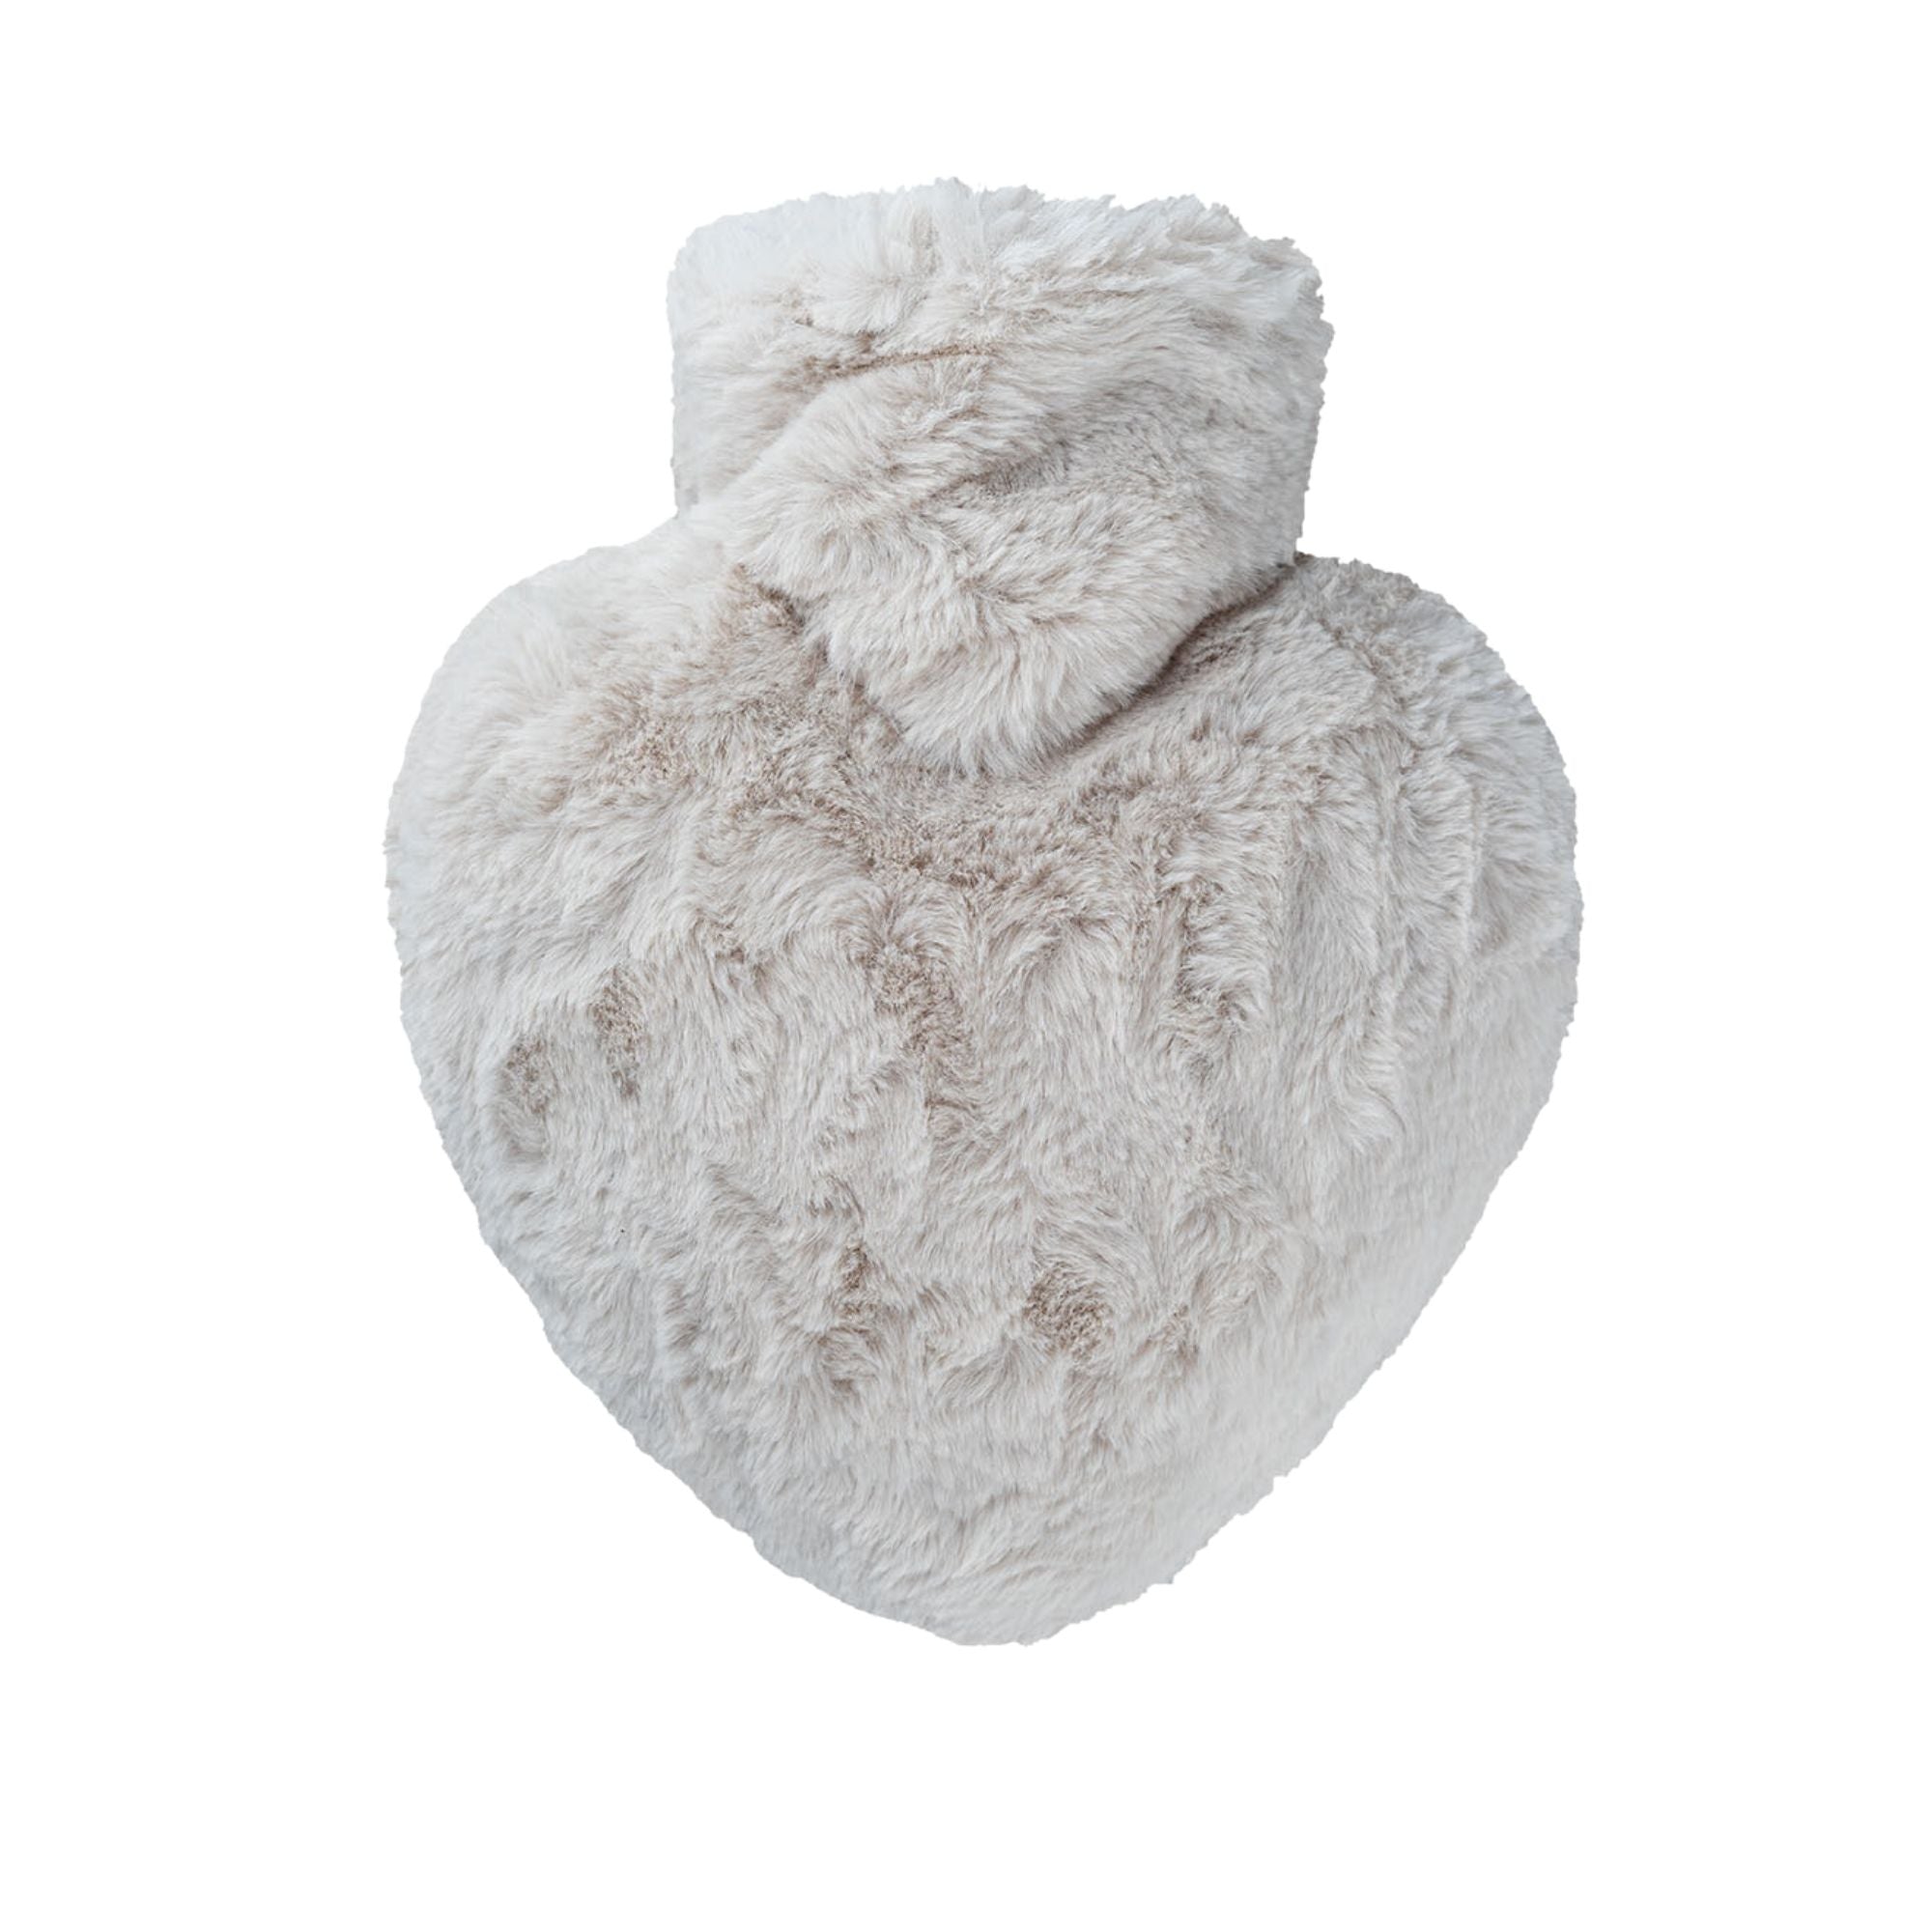 1 Litre Heart Shaped Hot Water Bottle with Faux Fur Taupe Cover (rubberless)